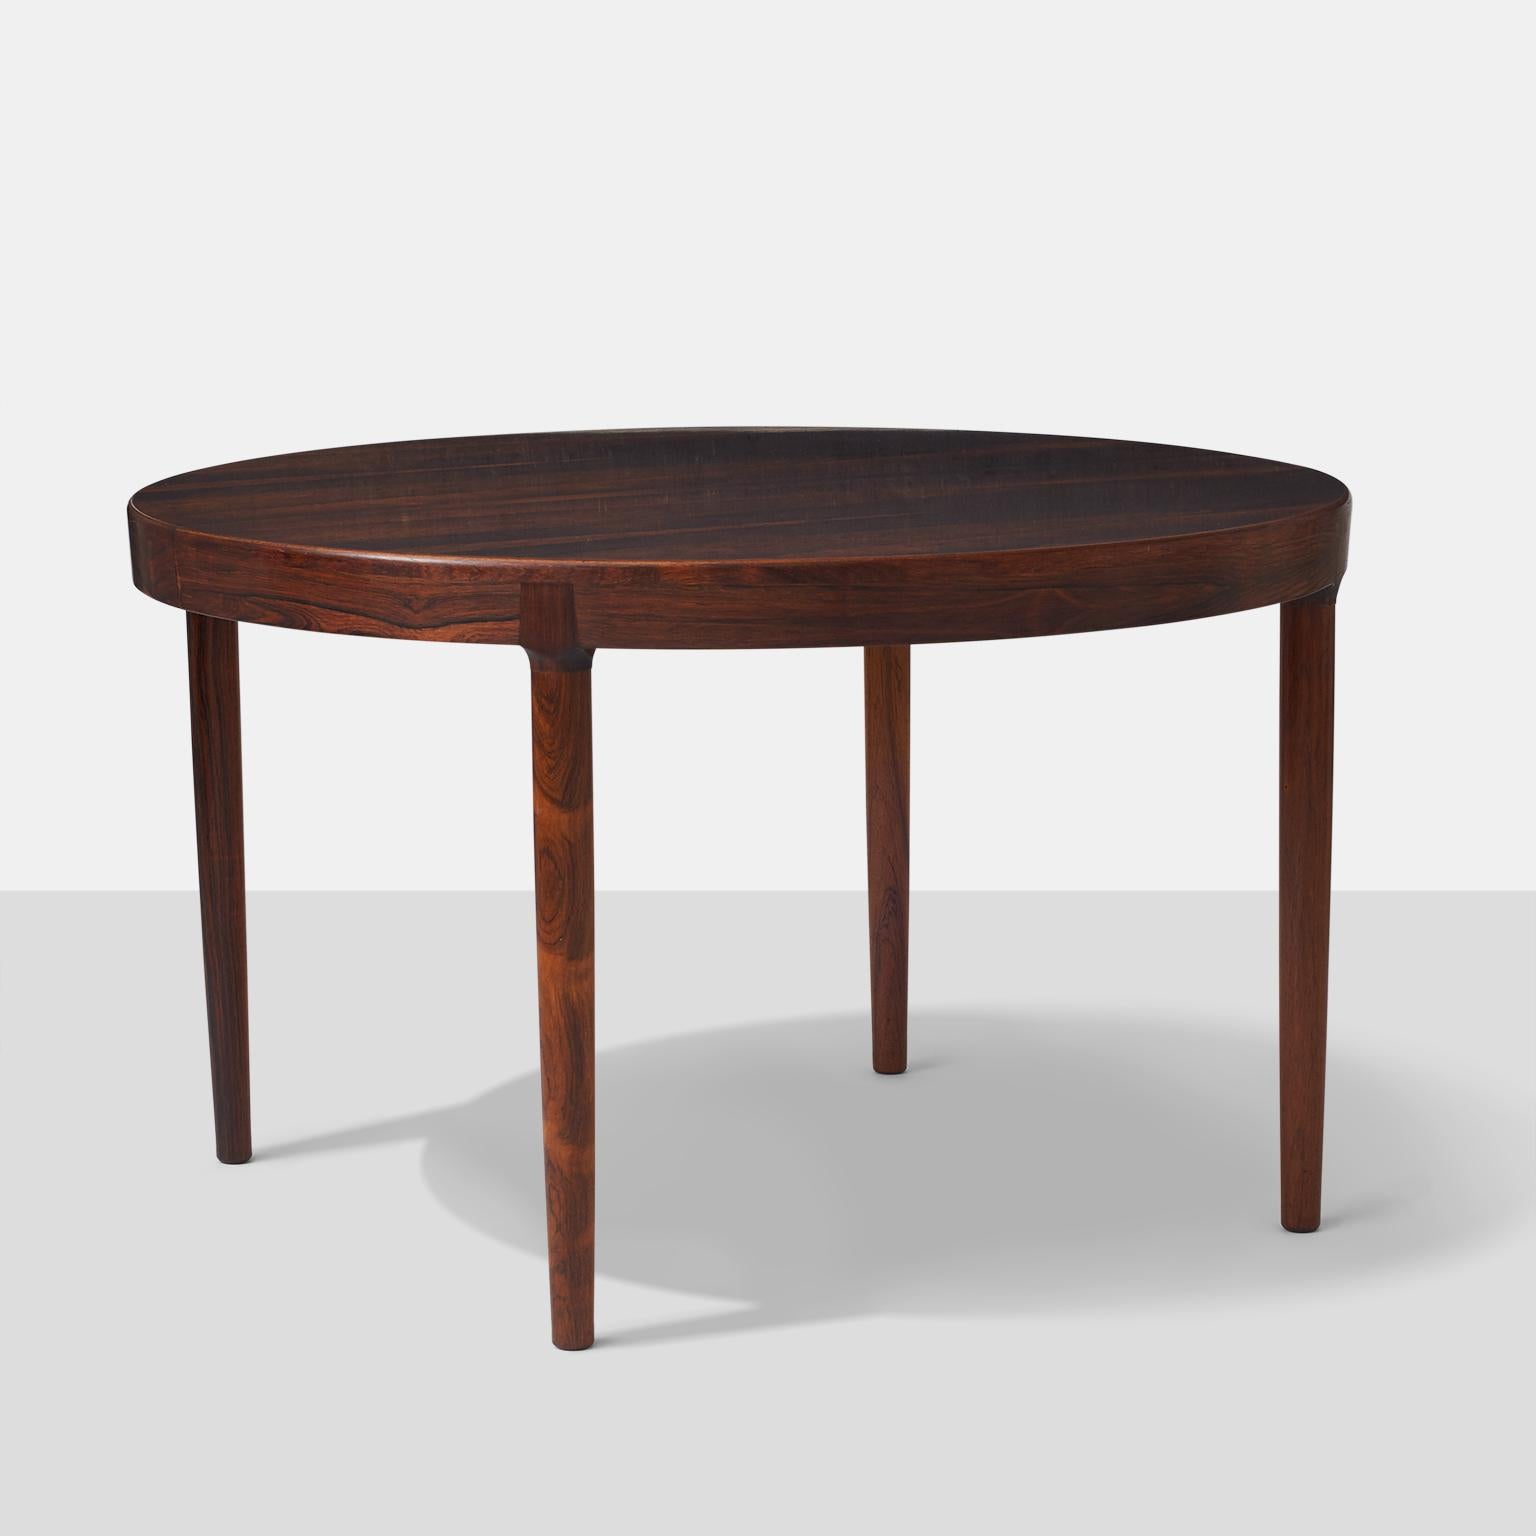 A round dining table in Brazilian rosewood with four legs. 2 leaves included. Attractive joint where the legs meet the apron.

Leaves add 19.5